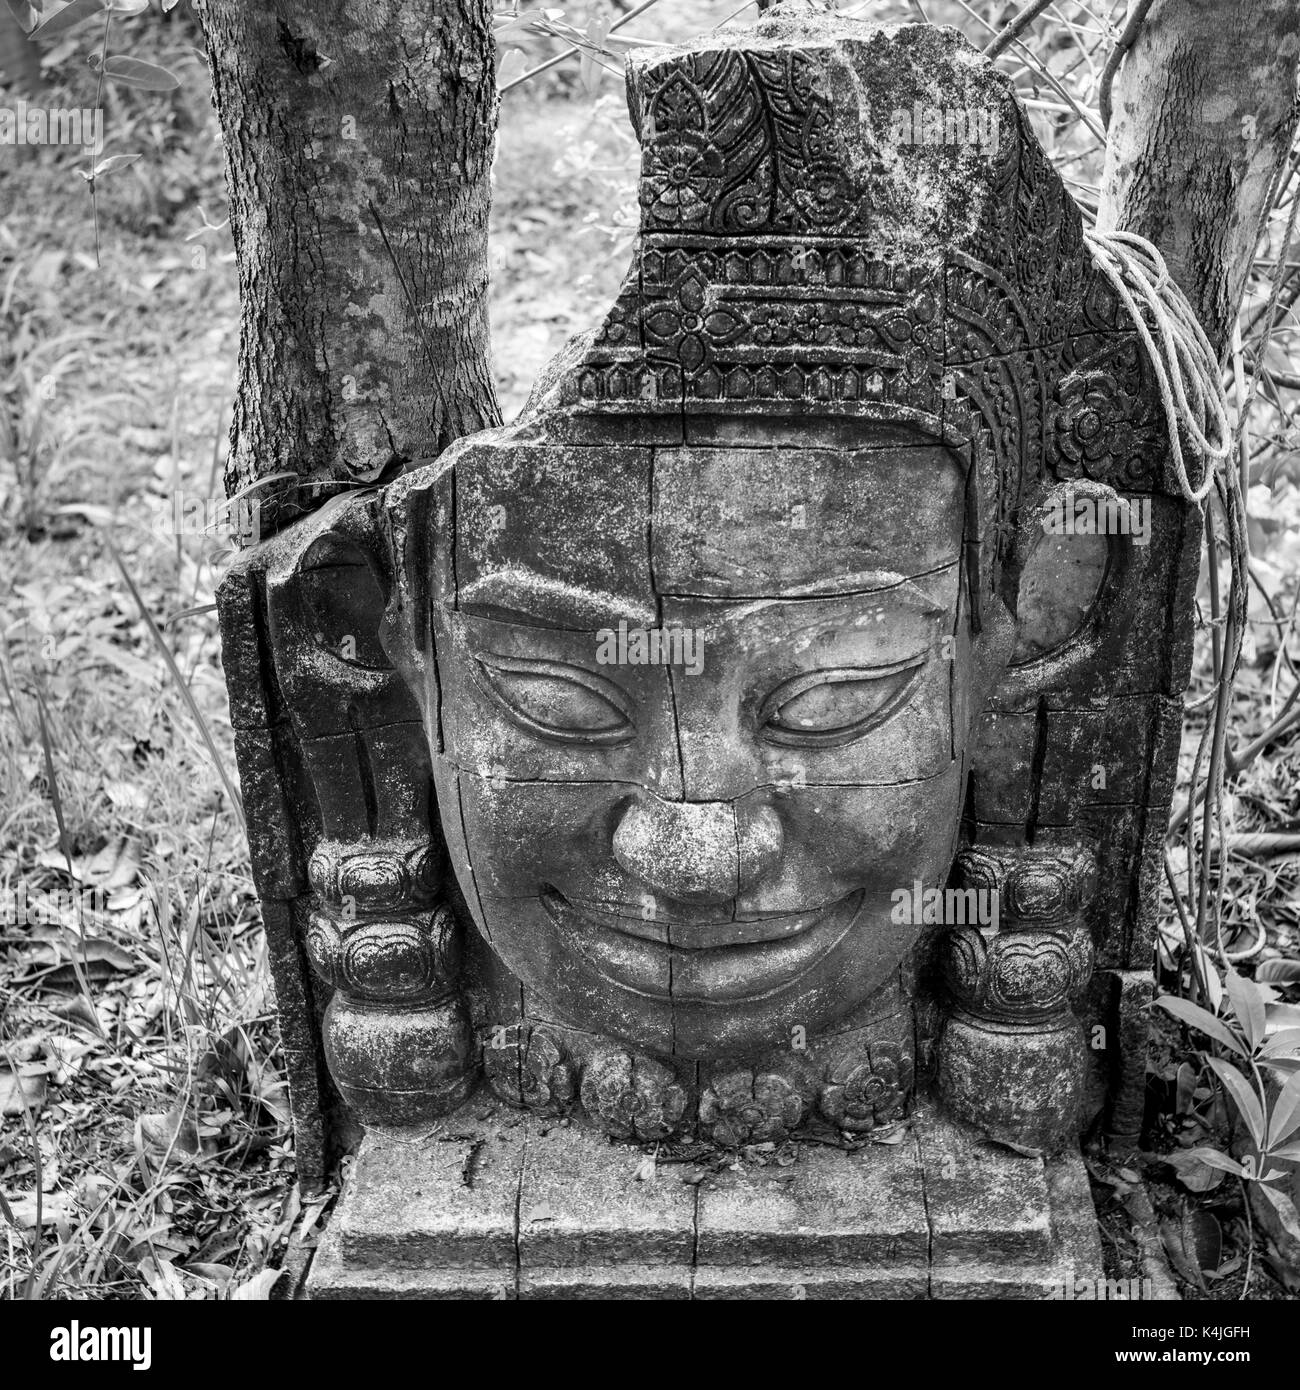 Close-up of carving details of statue, Koh Samui, Surat Thani Province, Thailand Stock Photo